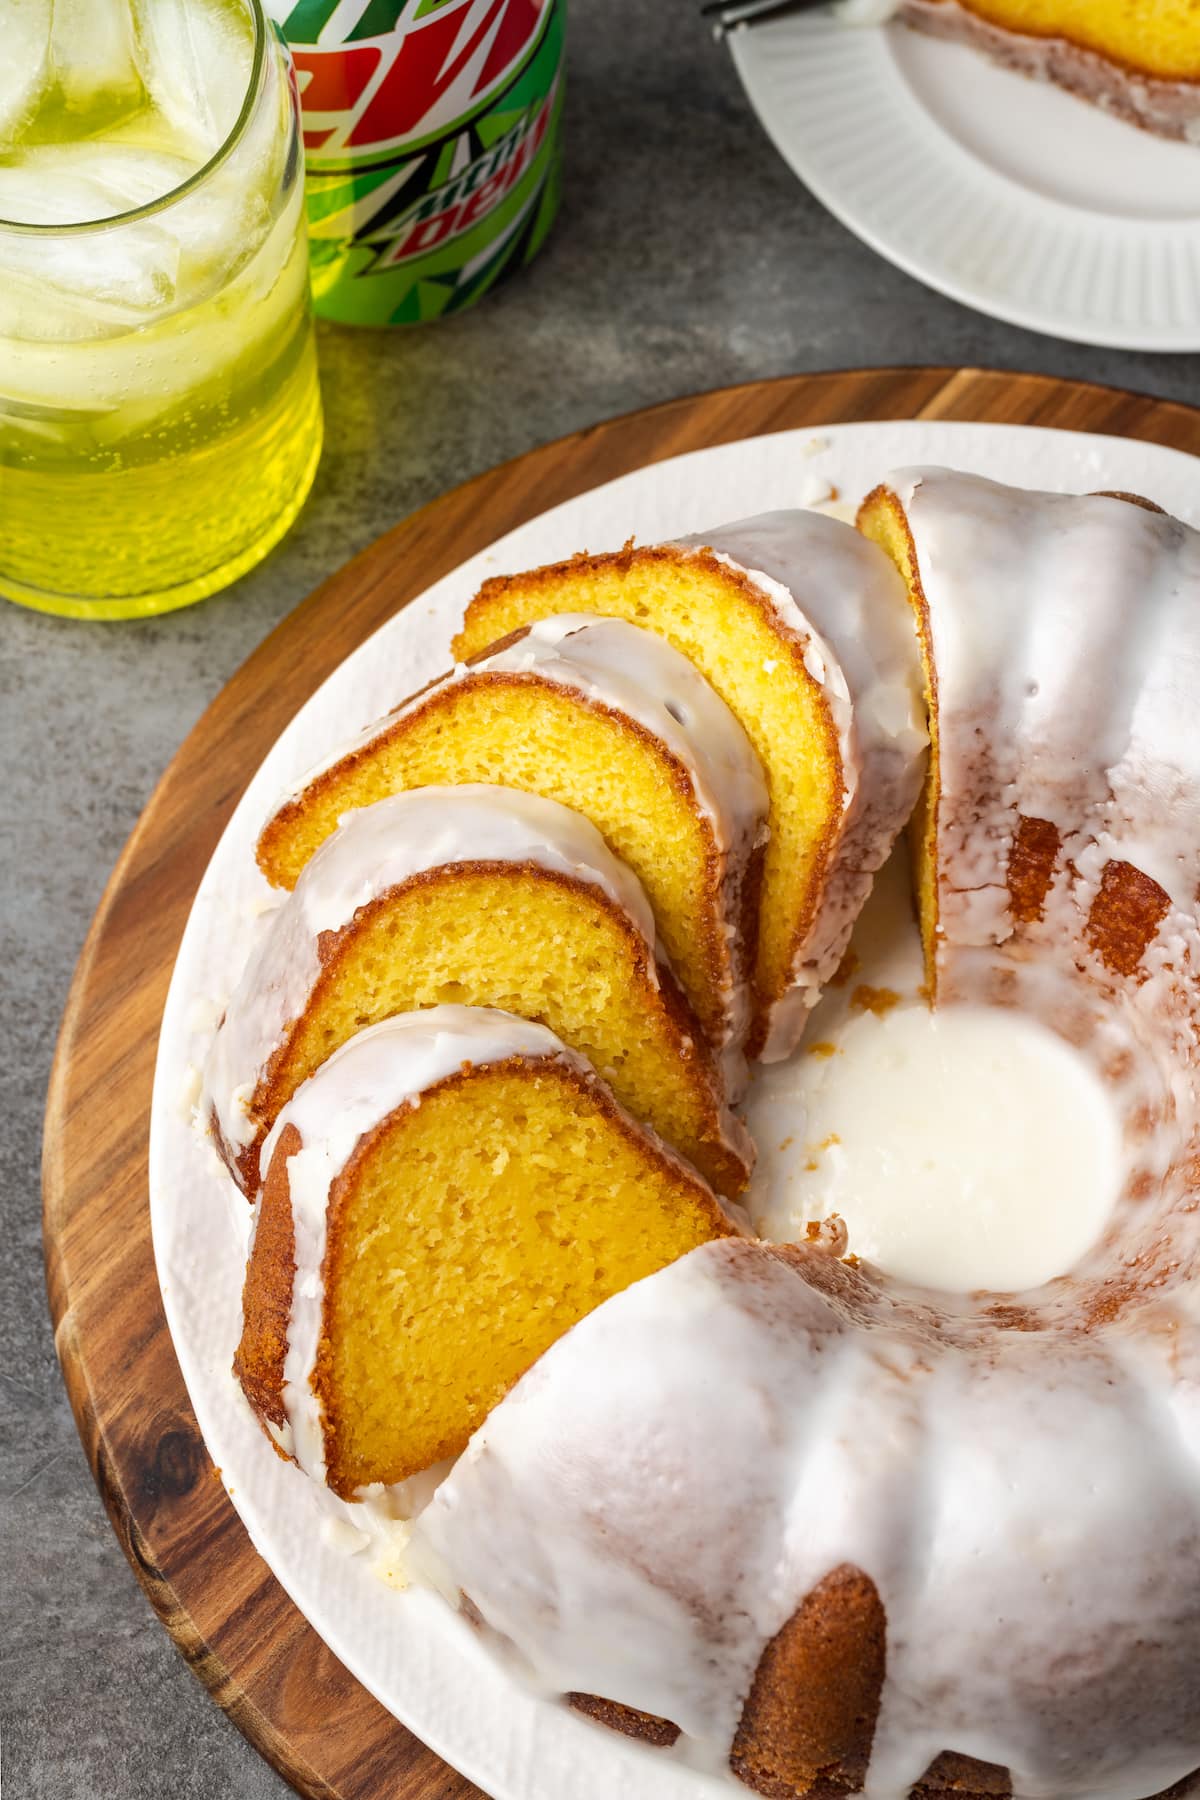 Glazed Mountain Dew bundt cake cut into slices on a plate, next to a glass of Mountain Dew.